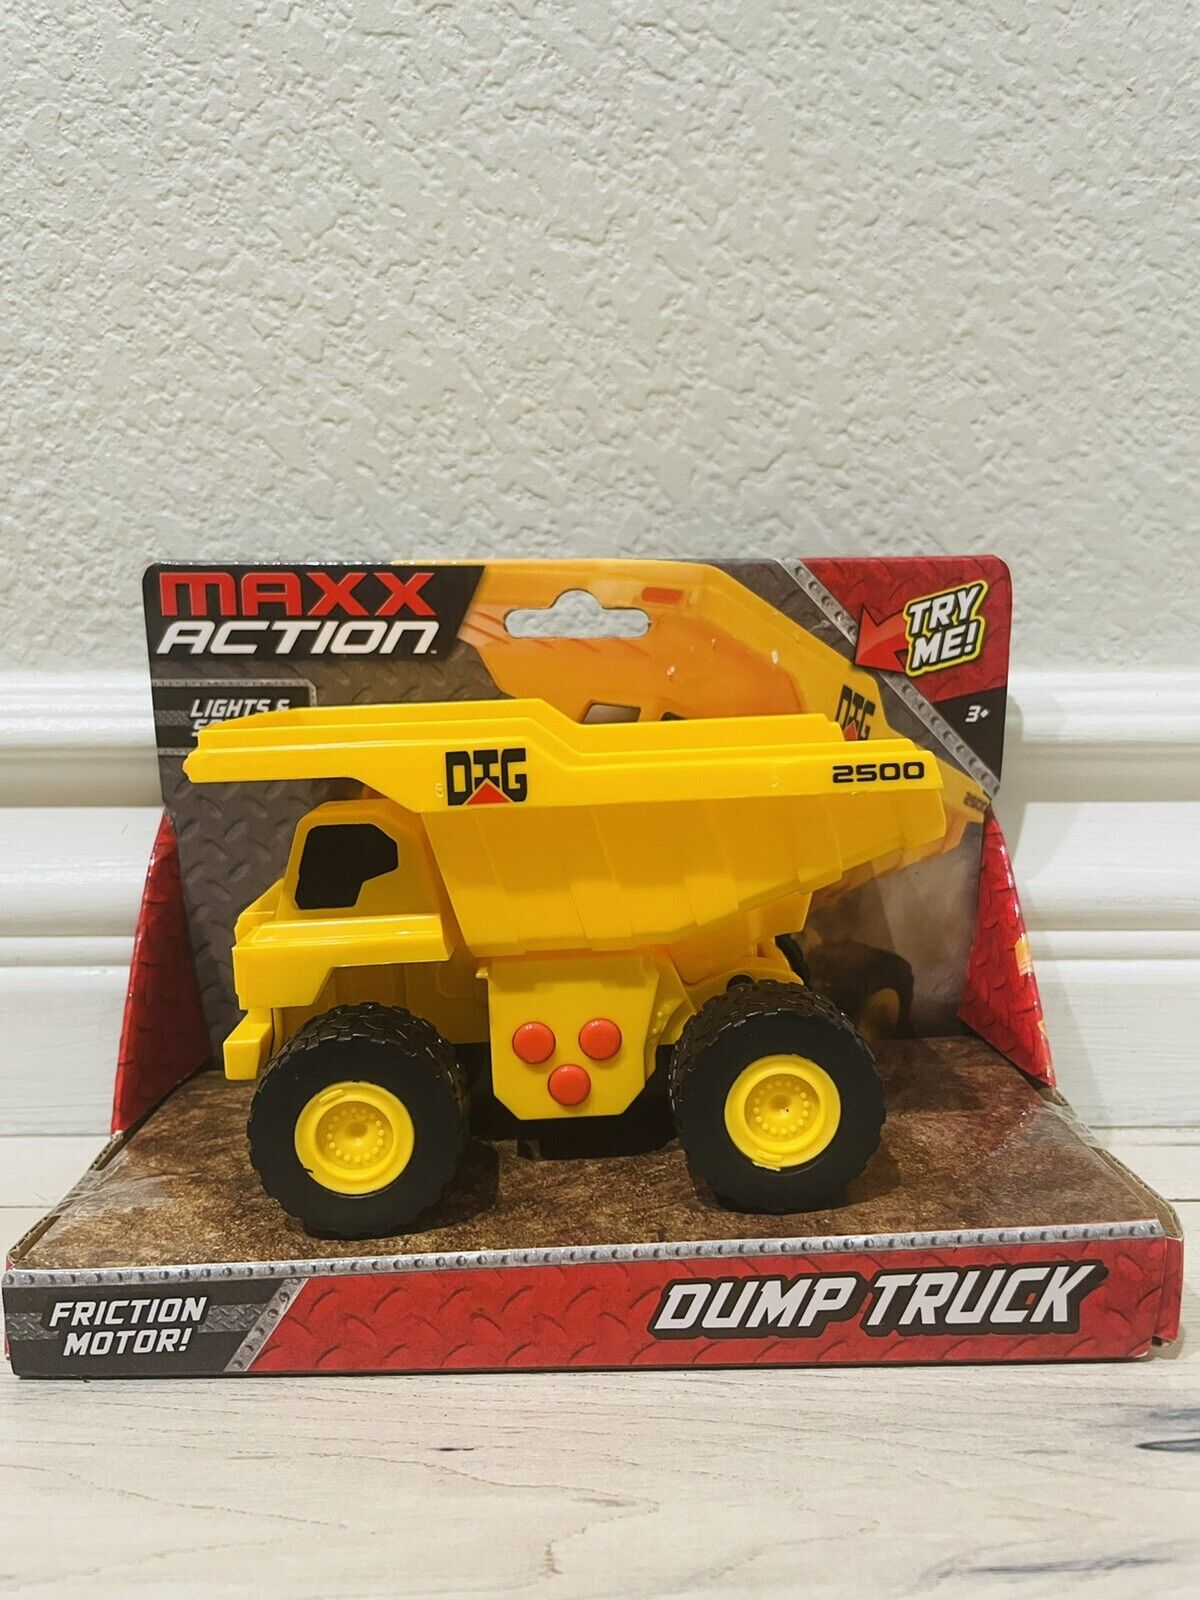 Maxx Action Dump Truck Construction Vehicle Lights And Sounds Friction Motor